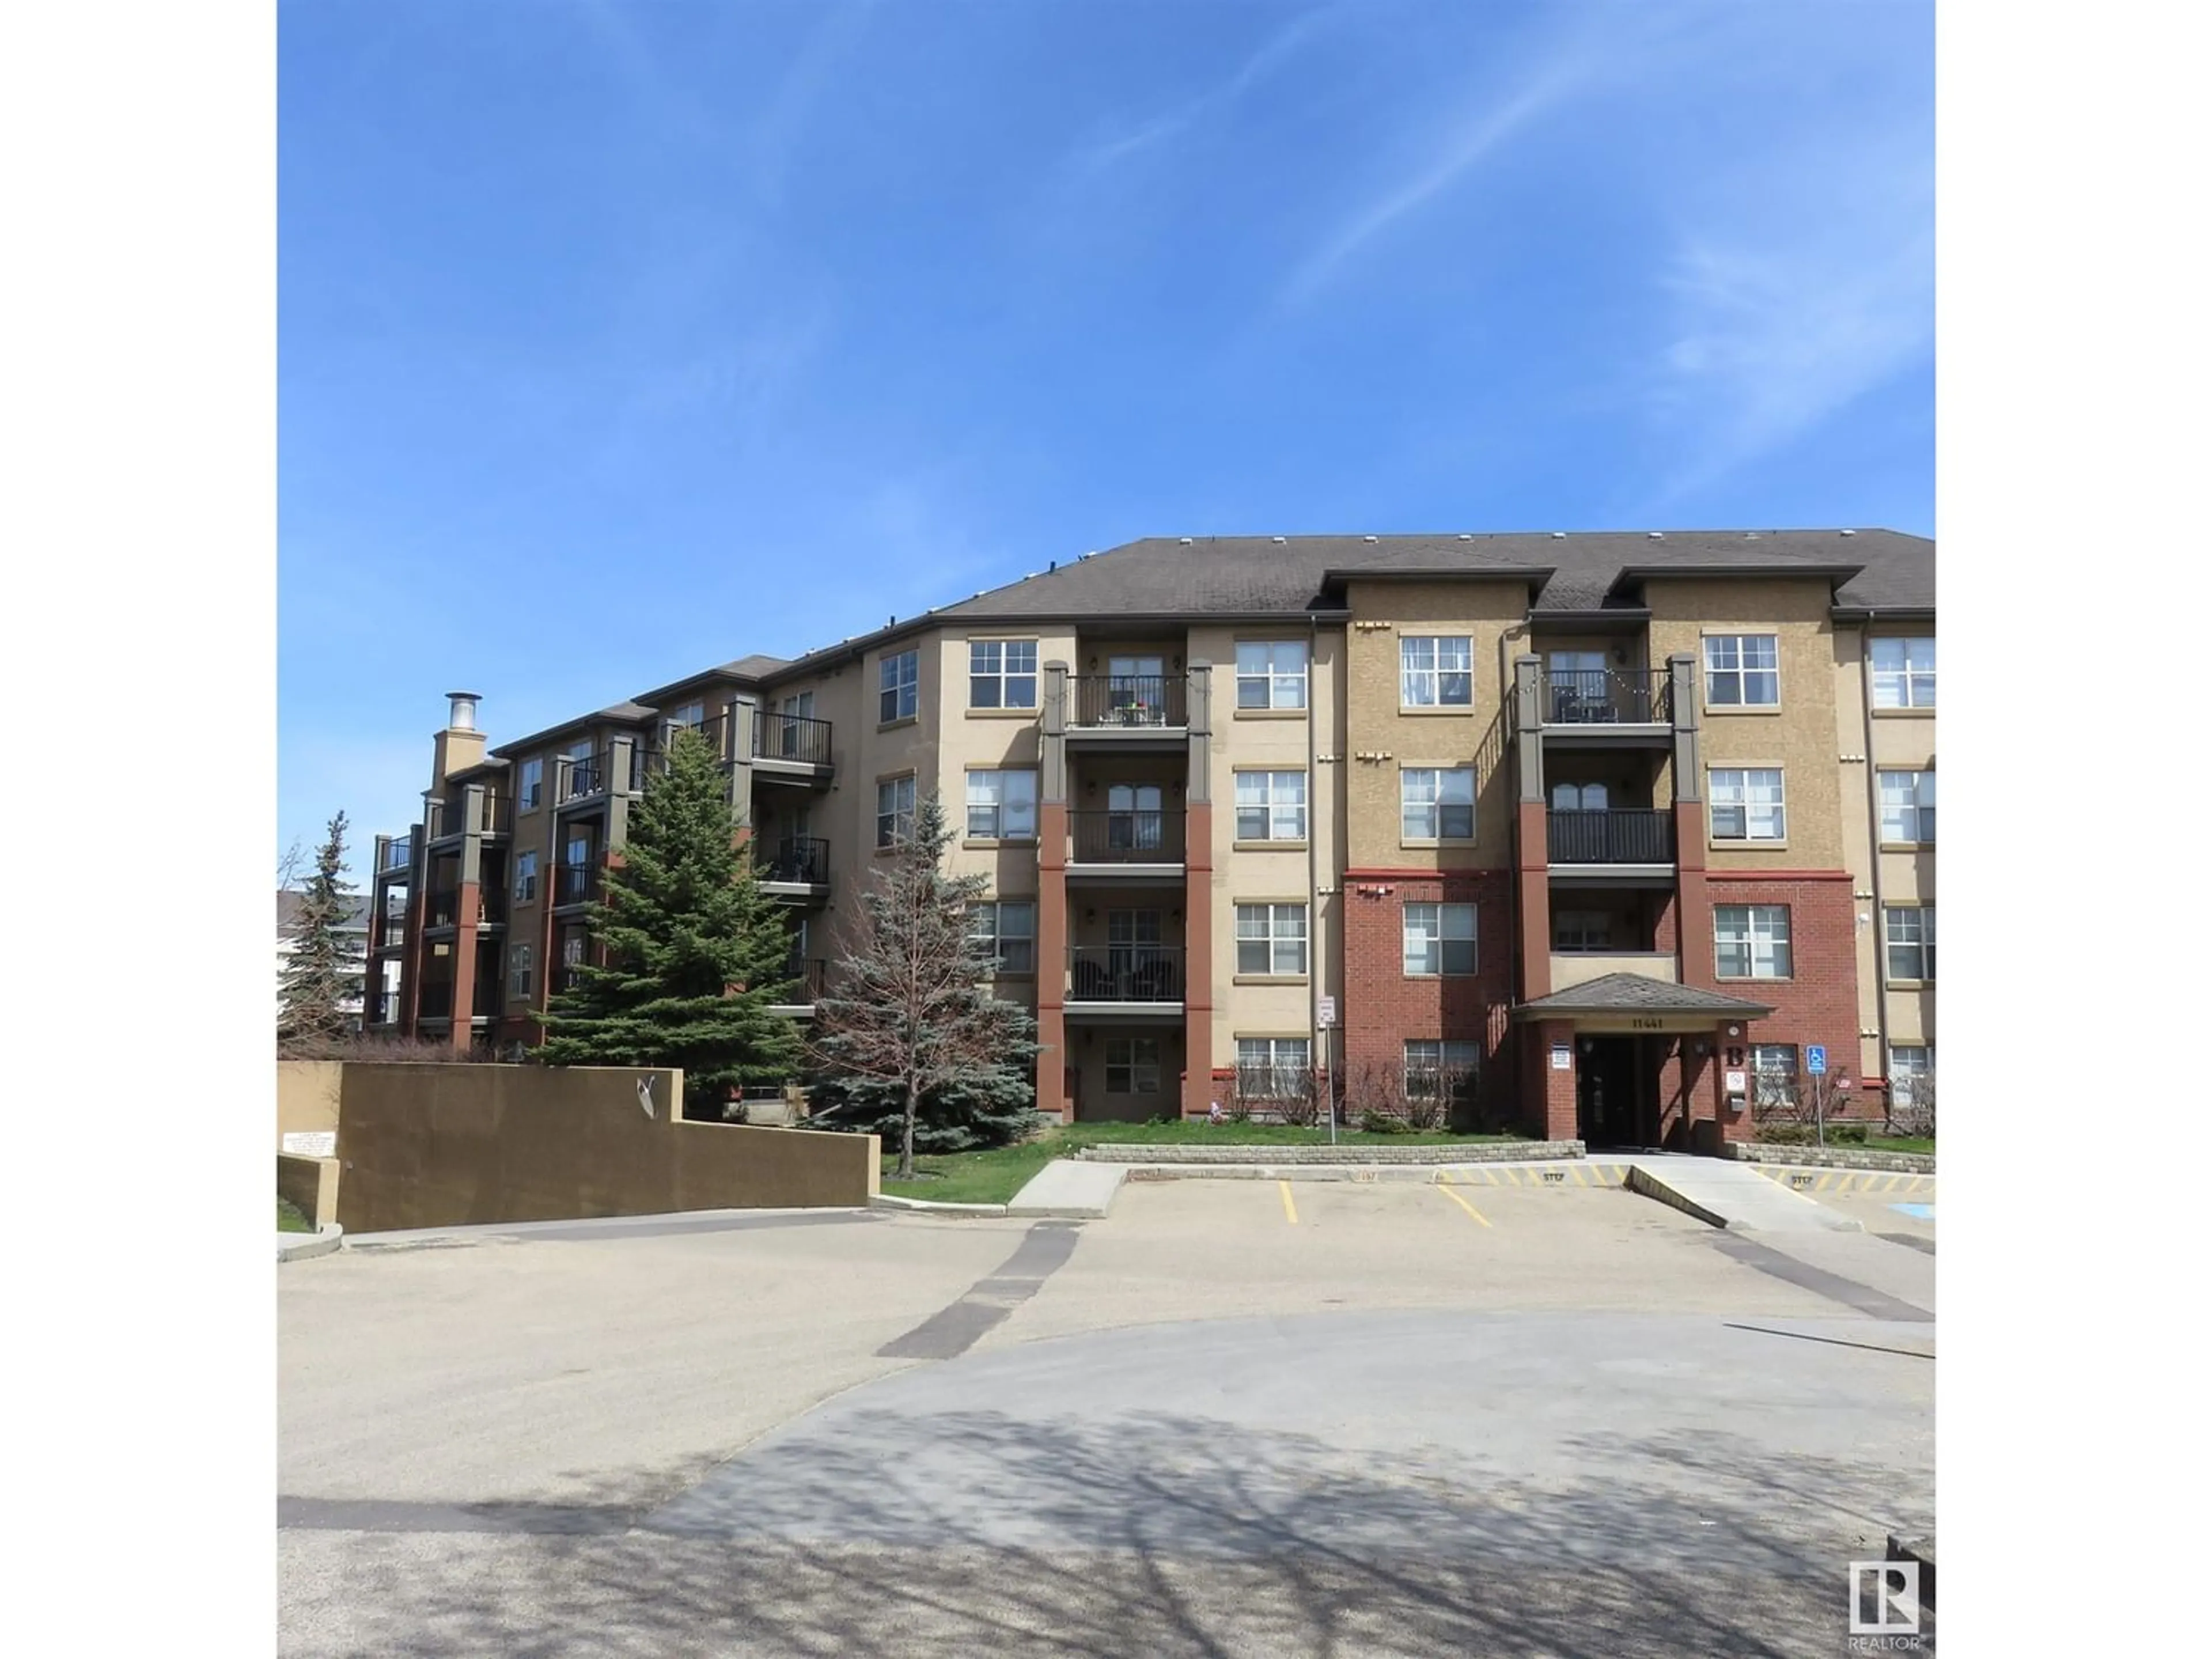 A pic from exterior of the house or condo for 113 11441 Ellerslie RD SW, Edmonton Alberta T6W1S9